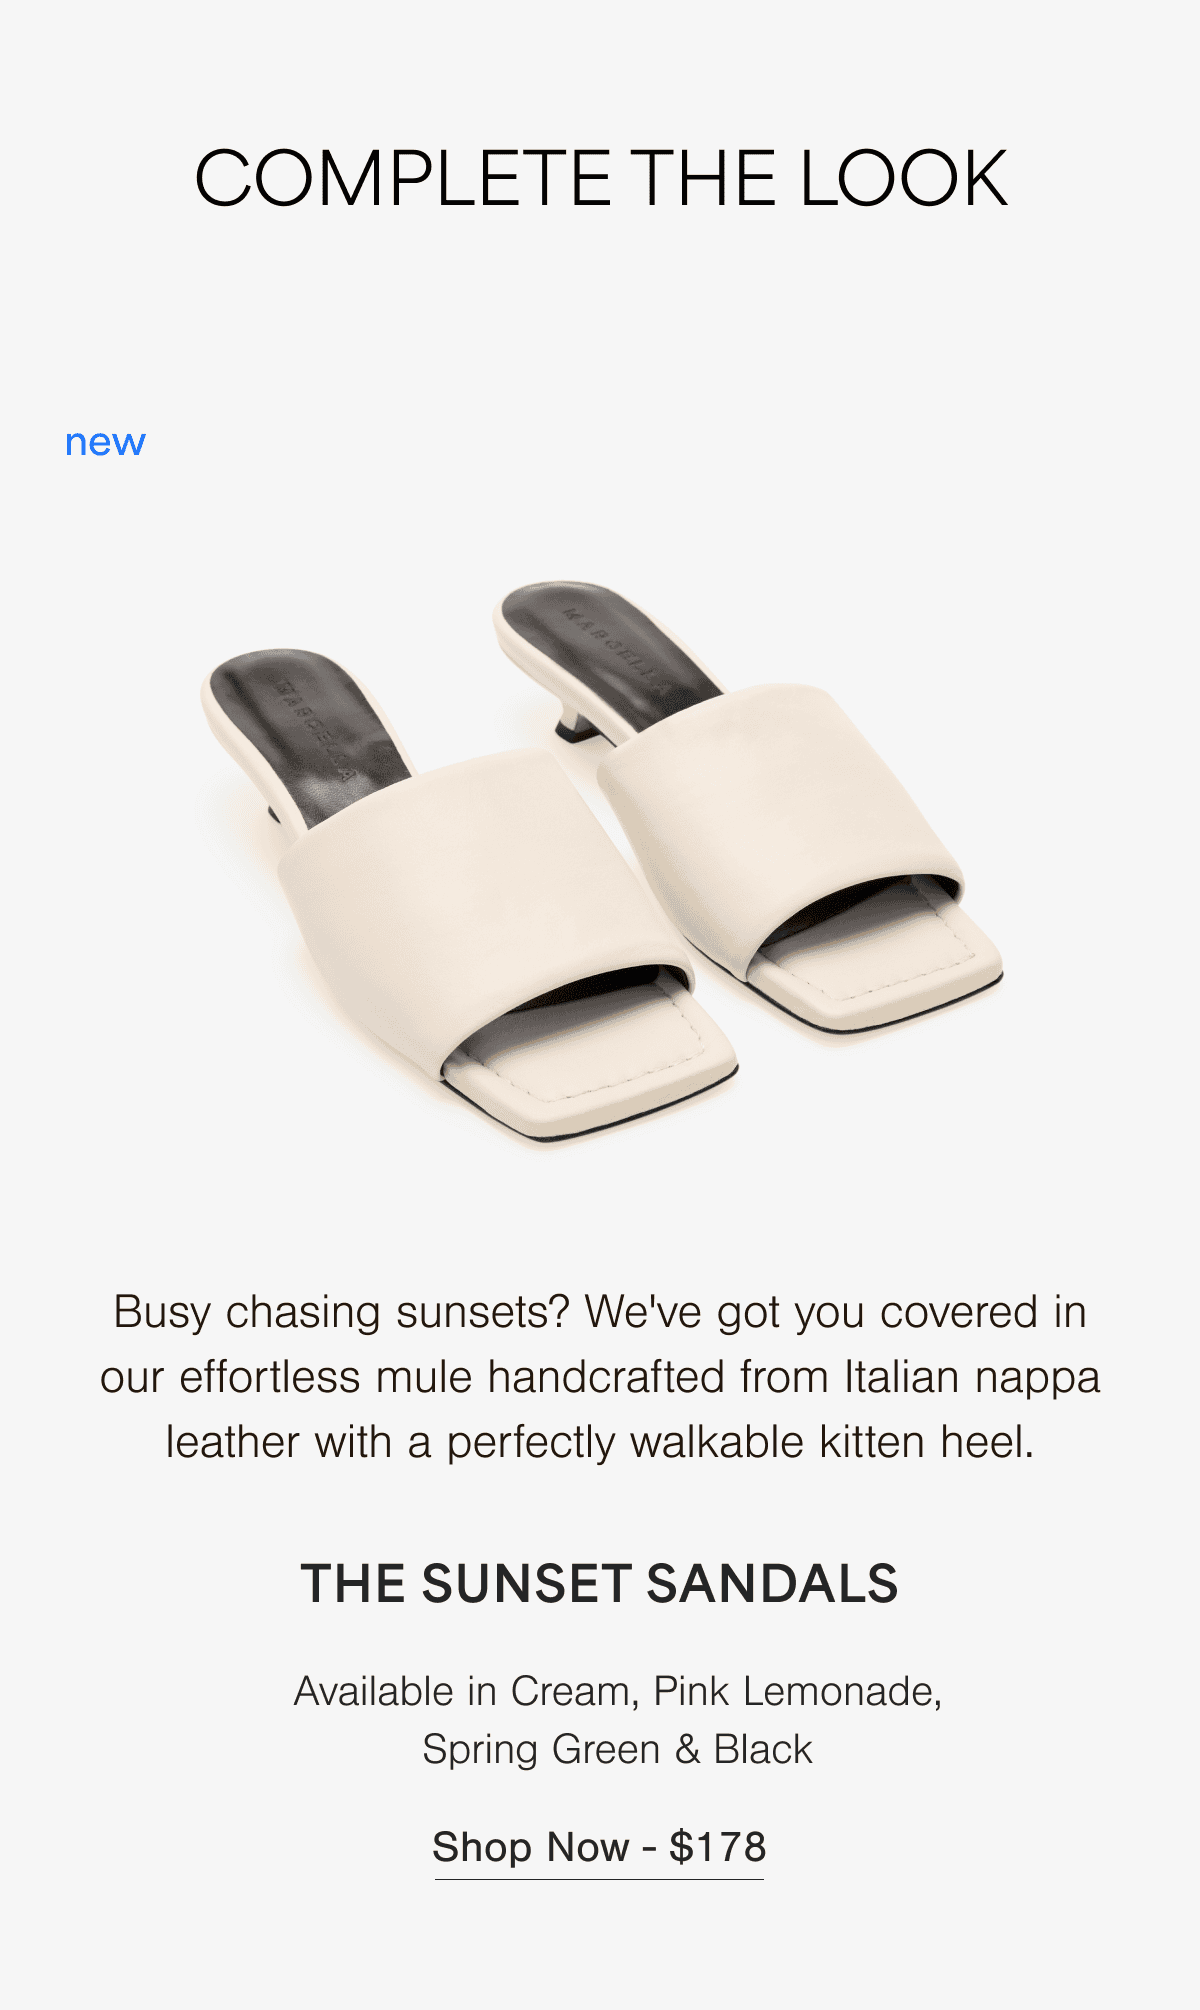 The Sunset Sandals